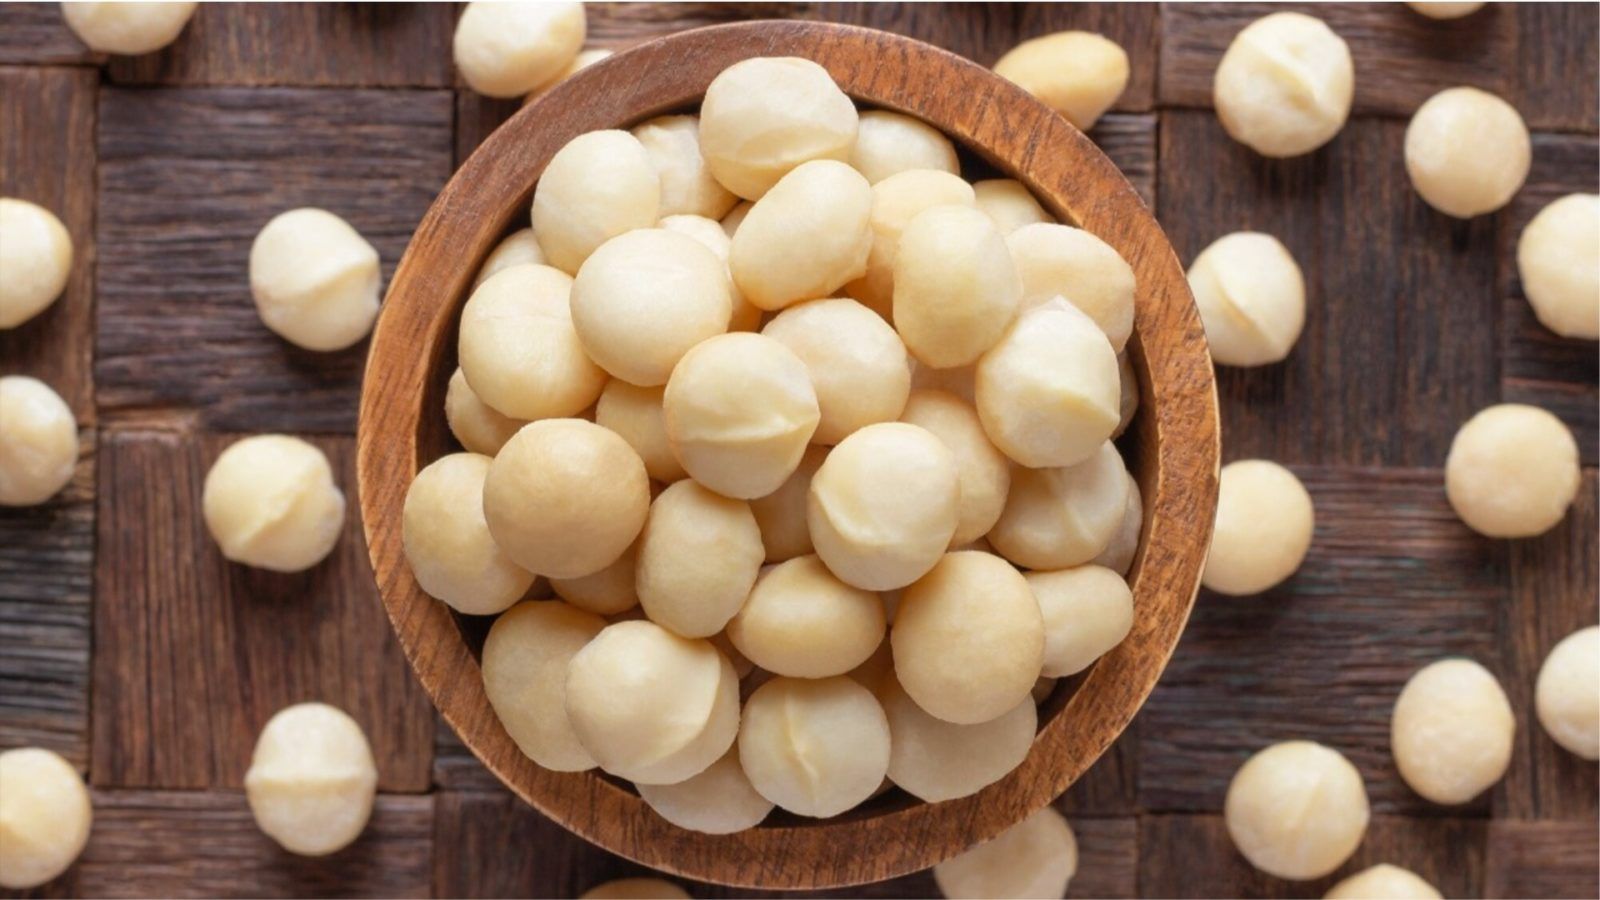 The health benefits of macadamia nuts — plus, the most delicious ways to enjoy them